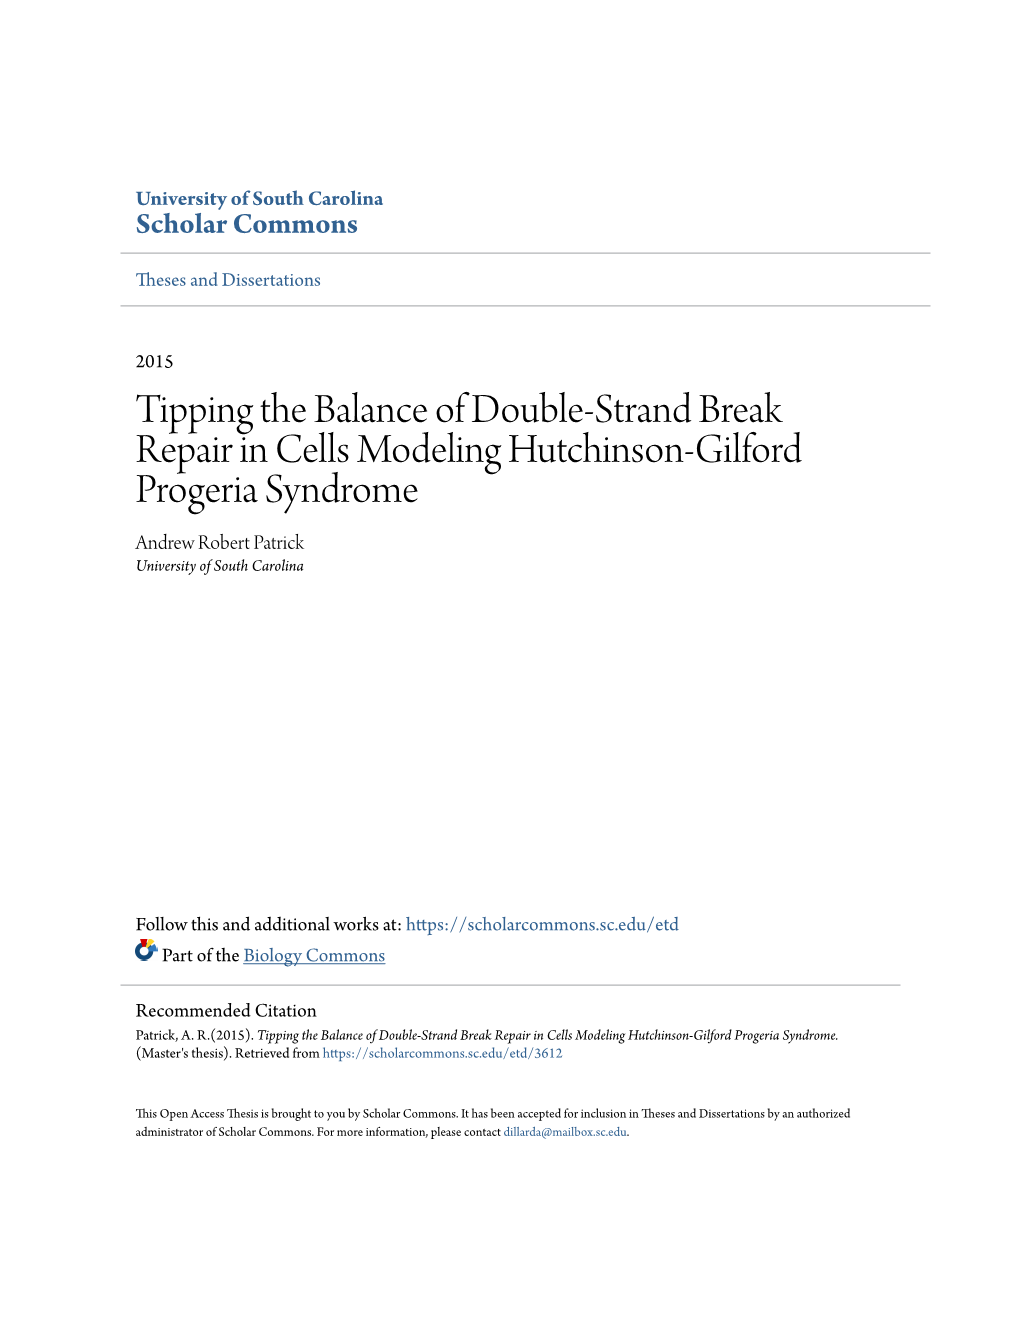 Tipping the Balance of Double-Strand Break Repair in Cells Modeling Hutchinson-Gilford Progeria Syndrome Andrew Robert Patrick University of South Carolina